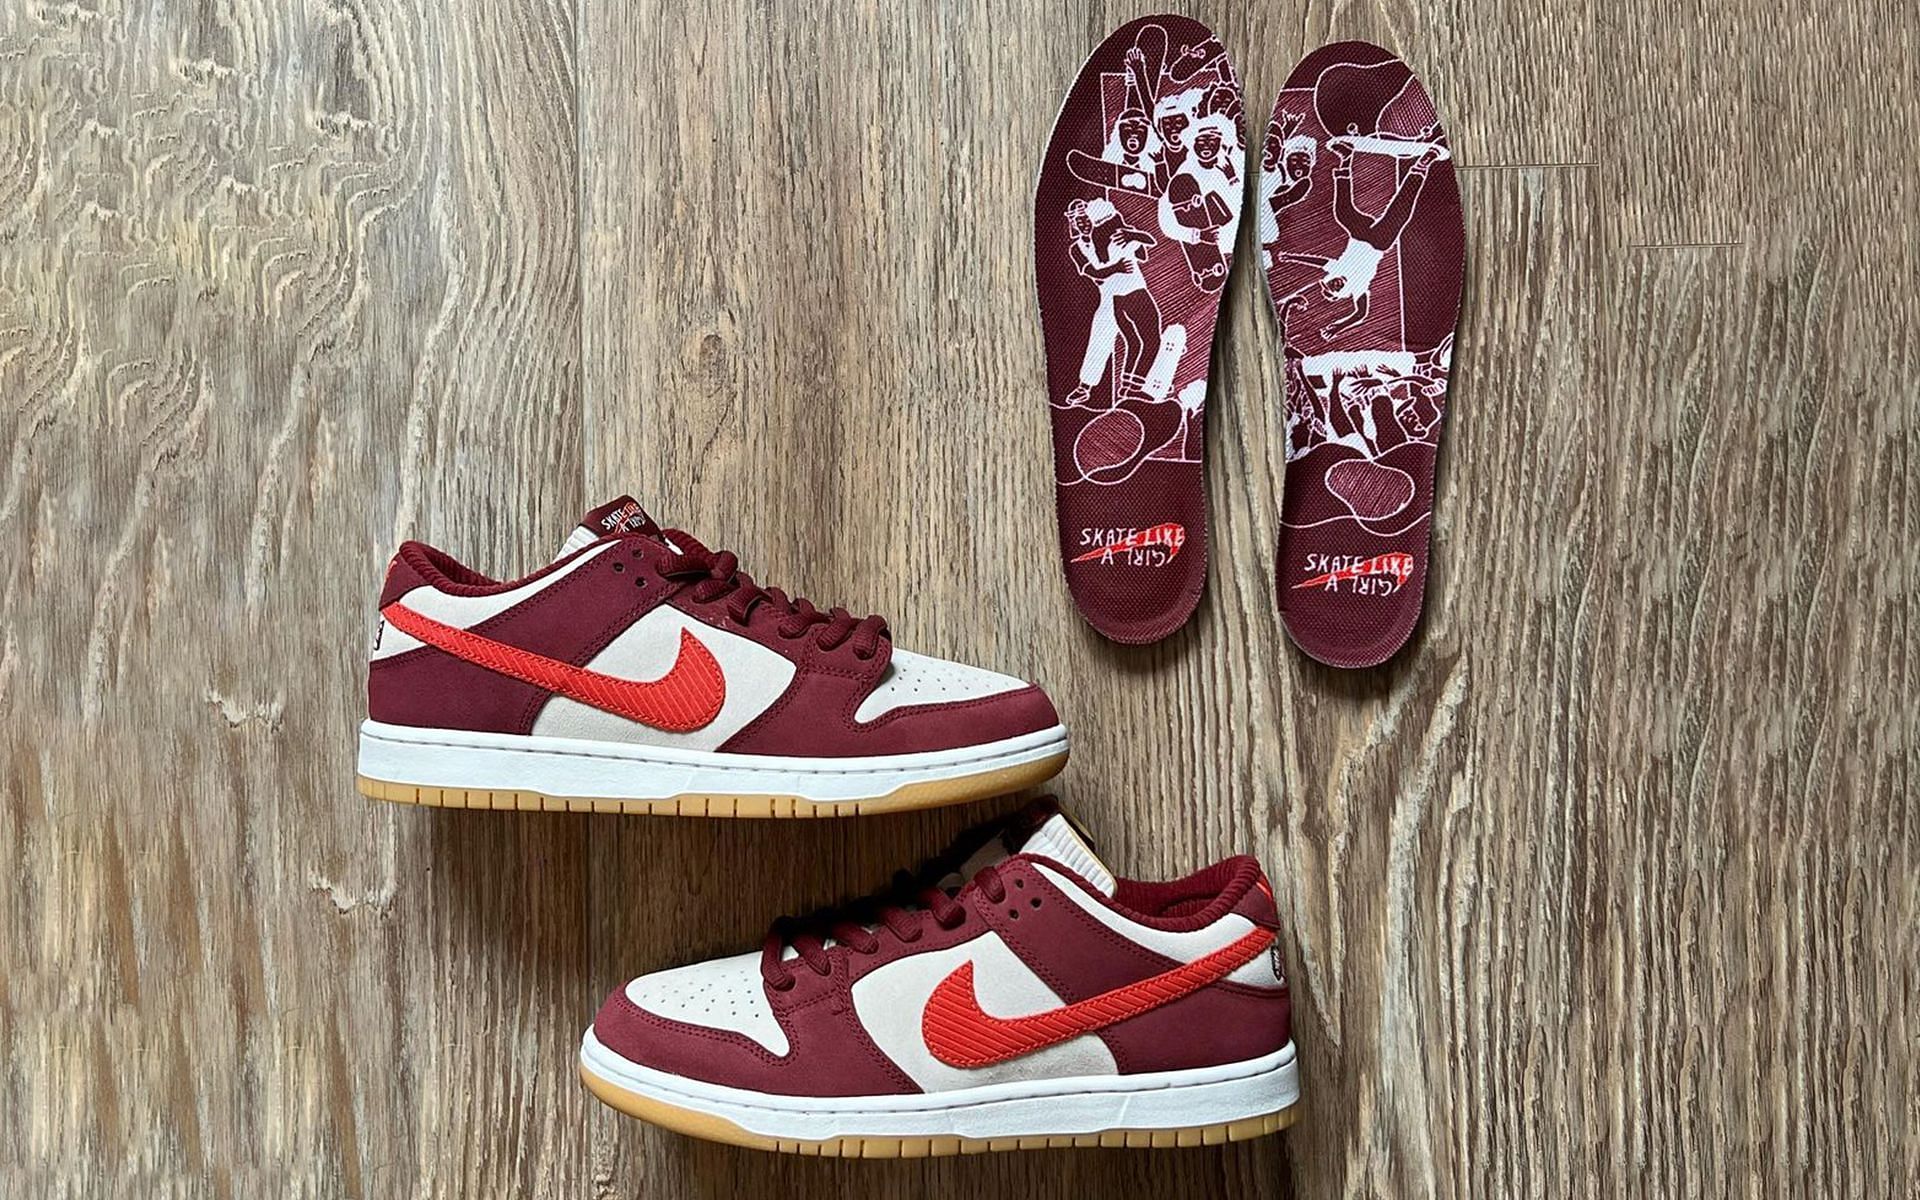 Skate Like a Girl x Nike SB Dunk Low: Everything we know so far